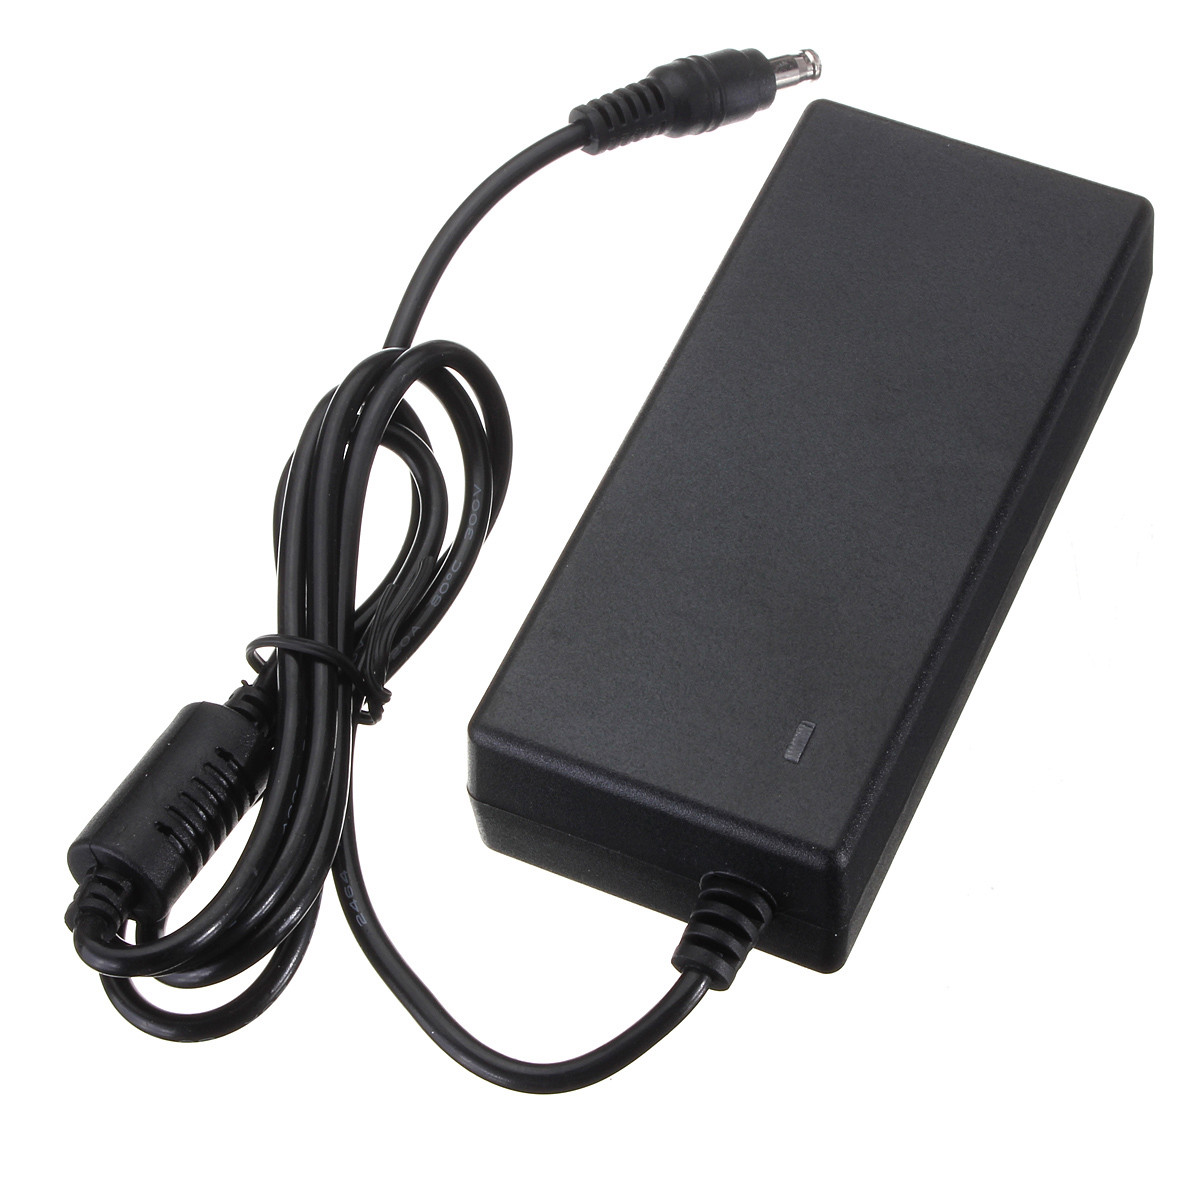 19V-316A-60W-AC-Power-Adapter-for-Laptop-SAMUNG-CPA09-004A-968144-5